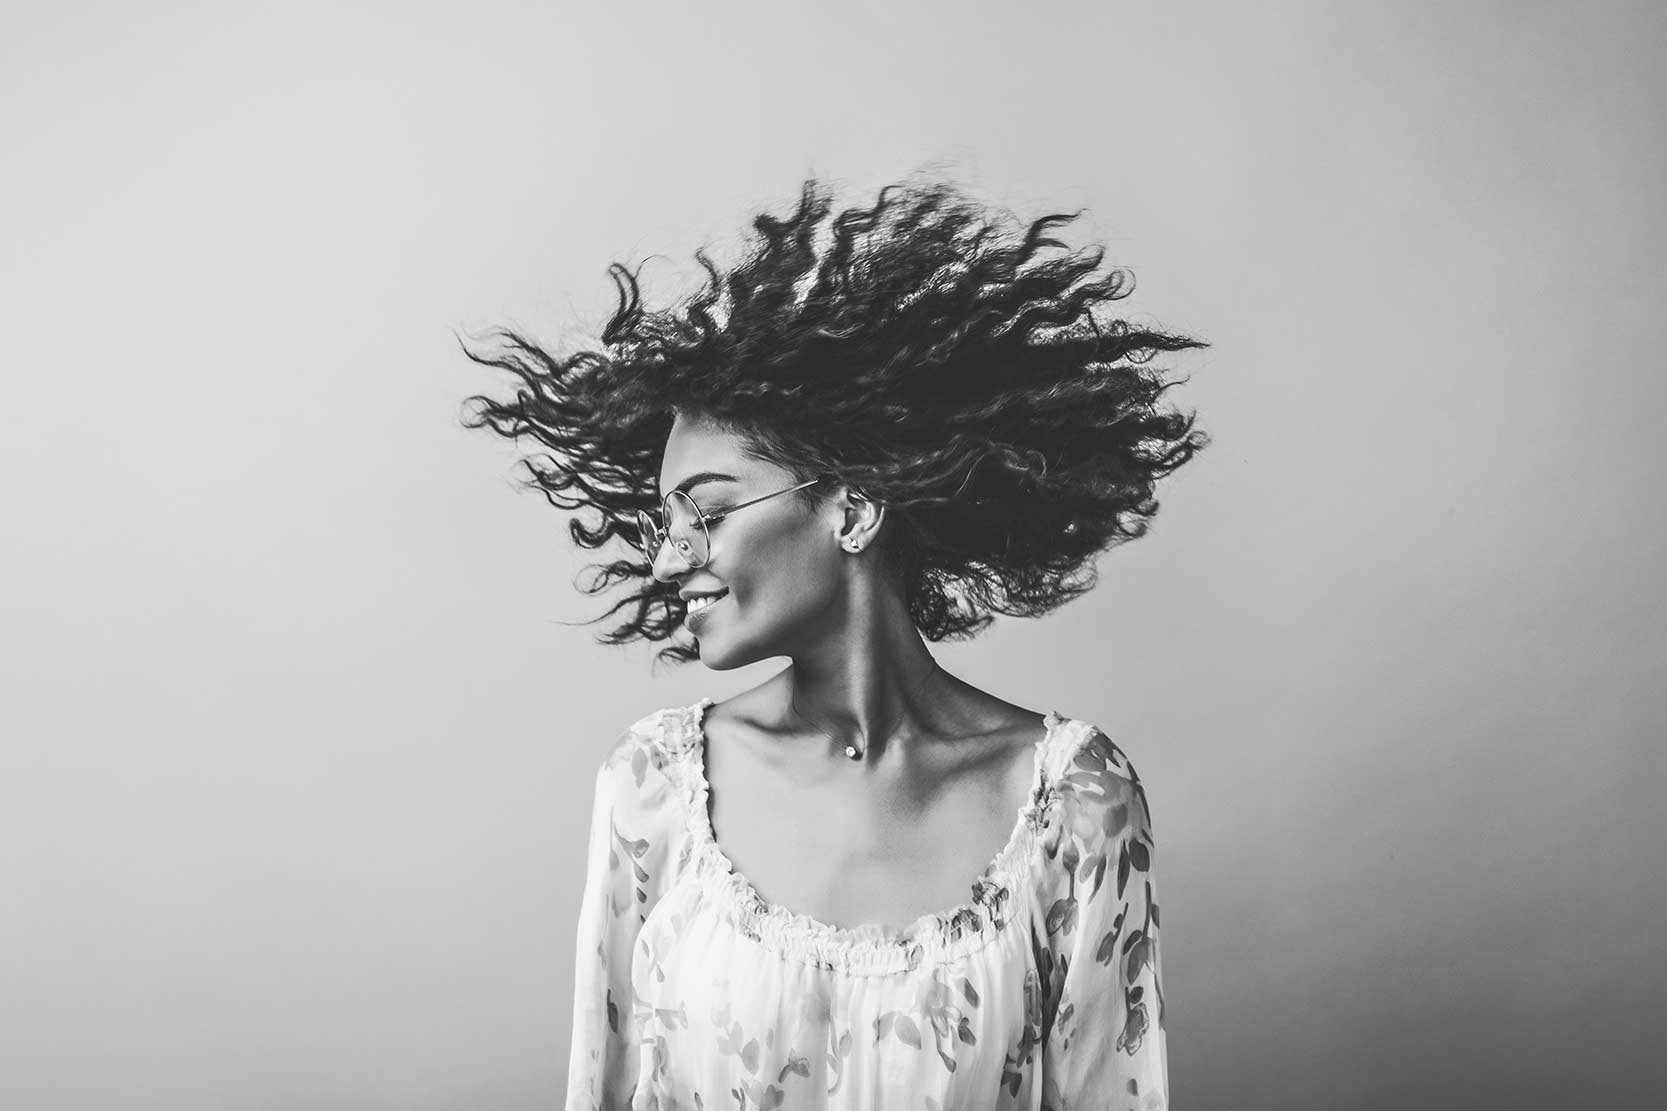 Portrait of a woman, hair blowing through the wind. Black and white preset.